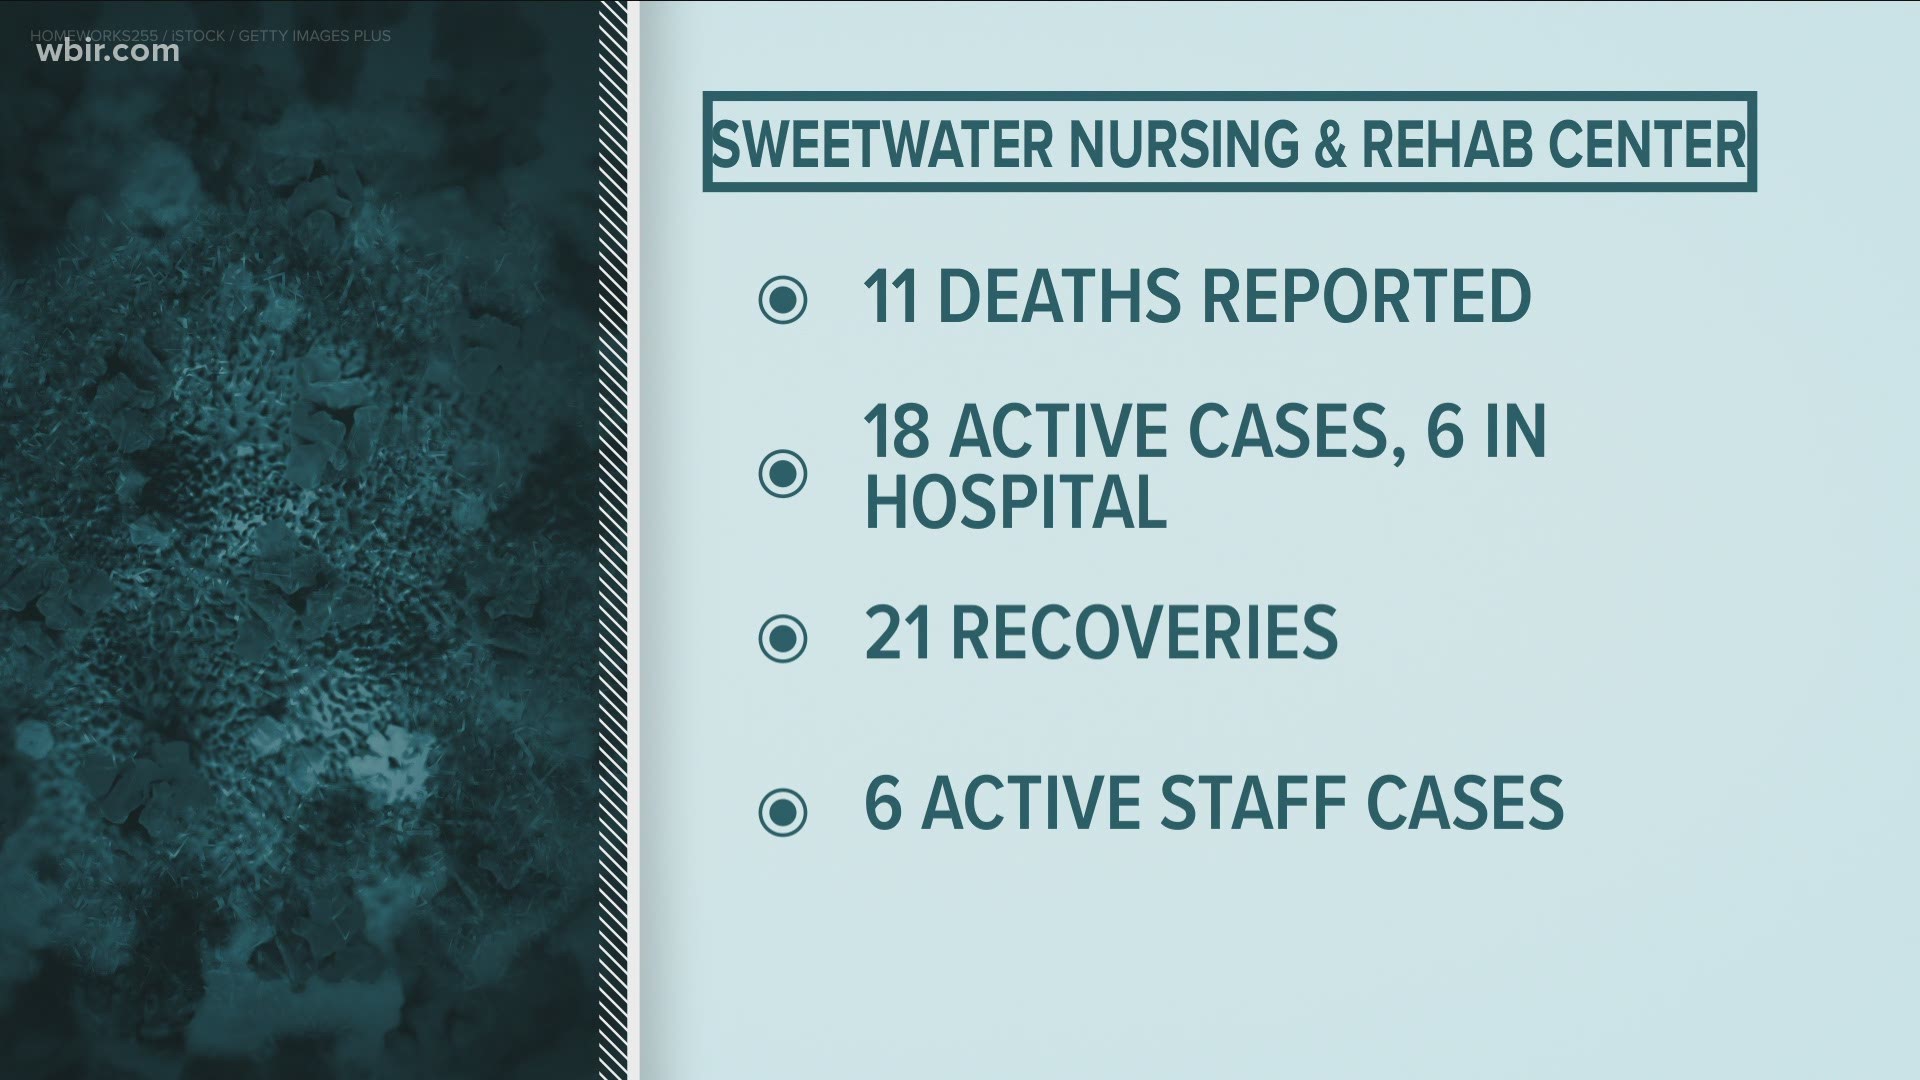 A Sweetwater nursing home is reporting 11 deaths -- including 9 since last Friday.